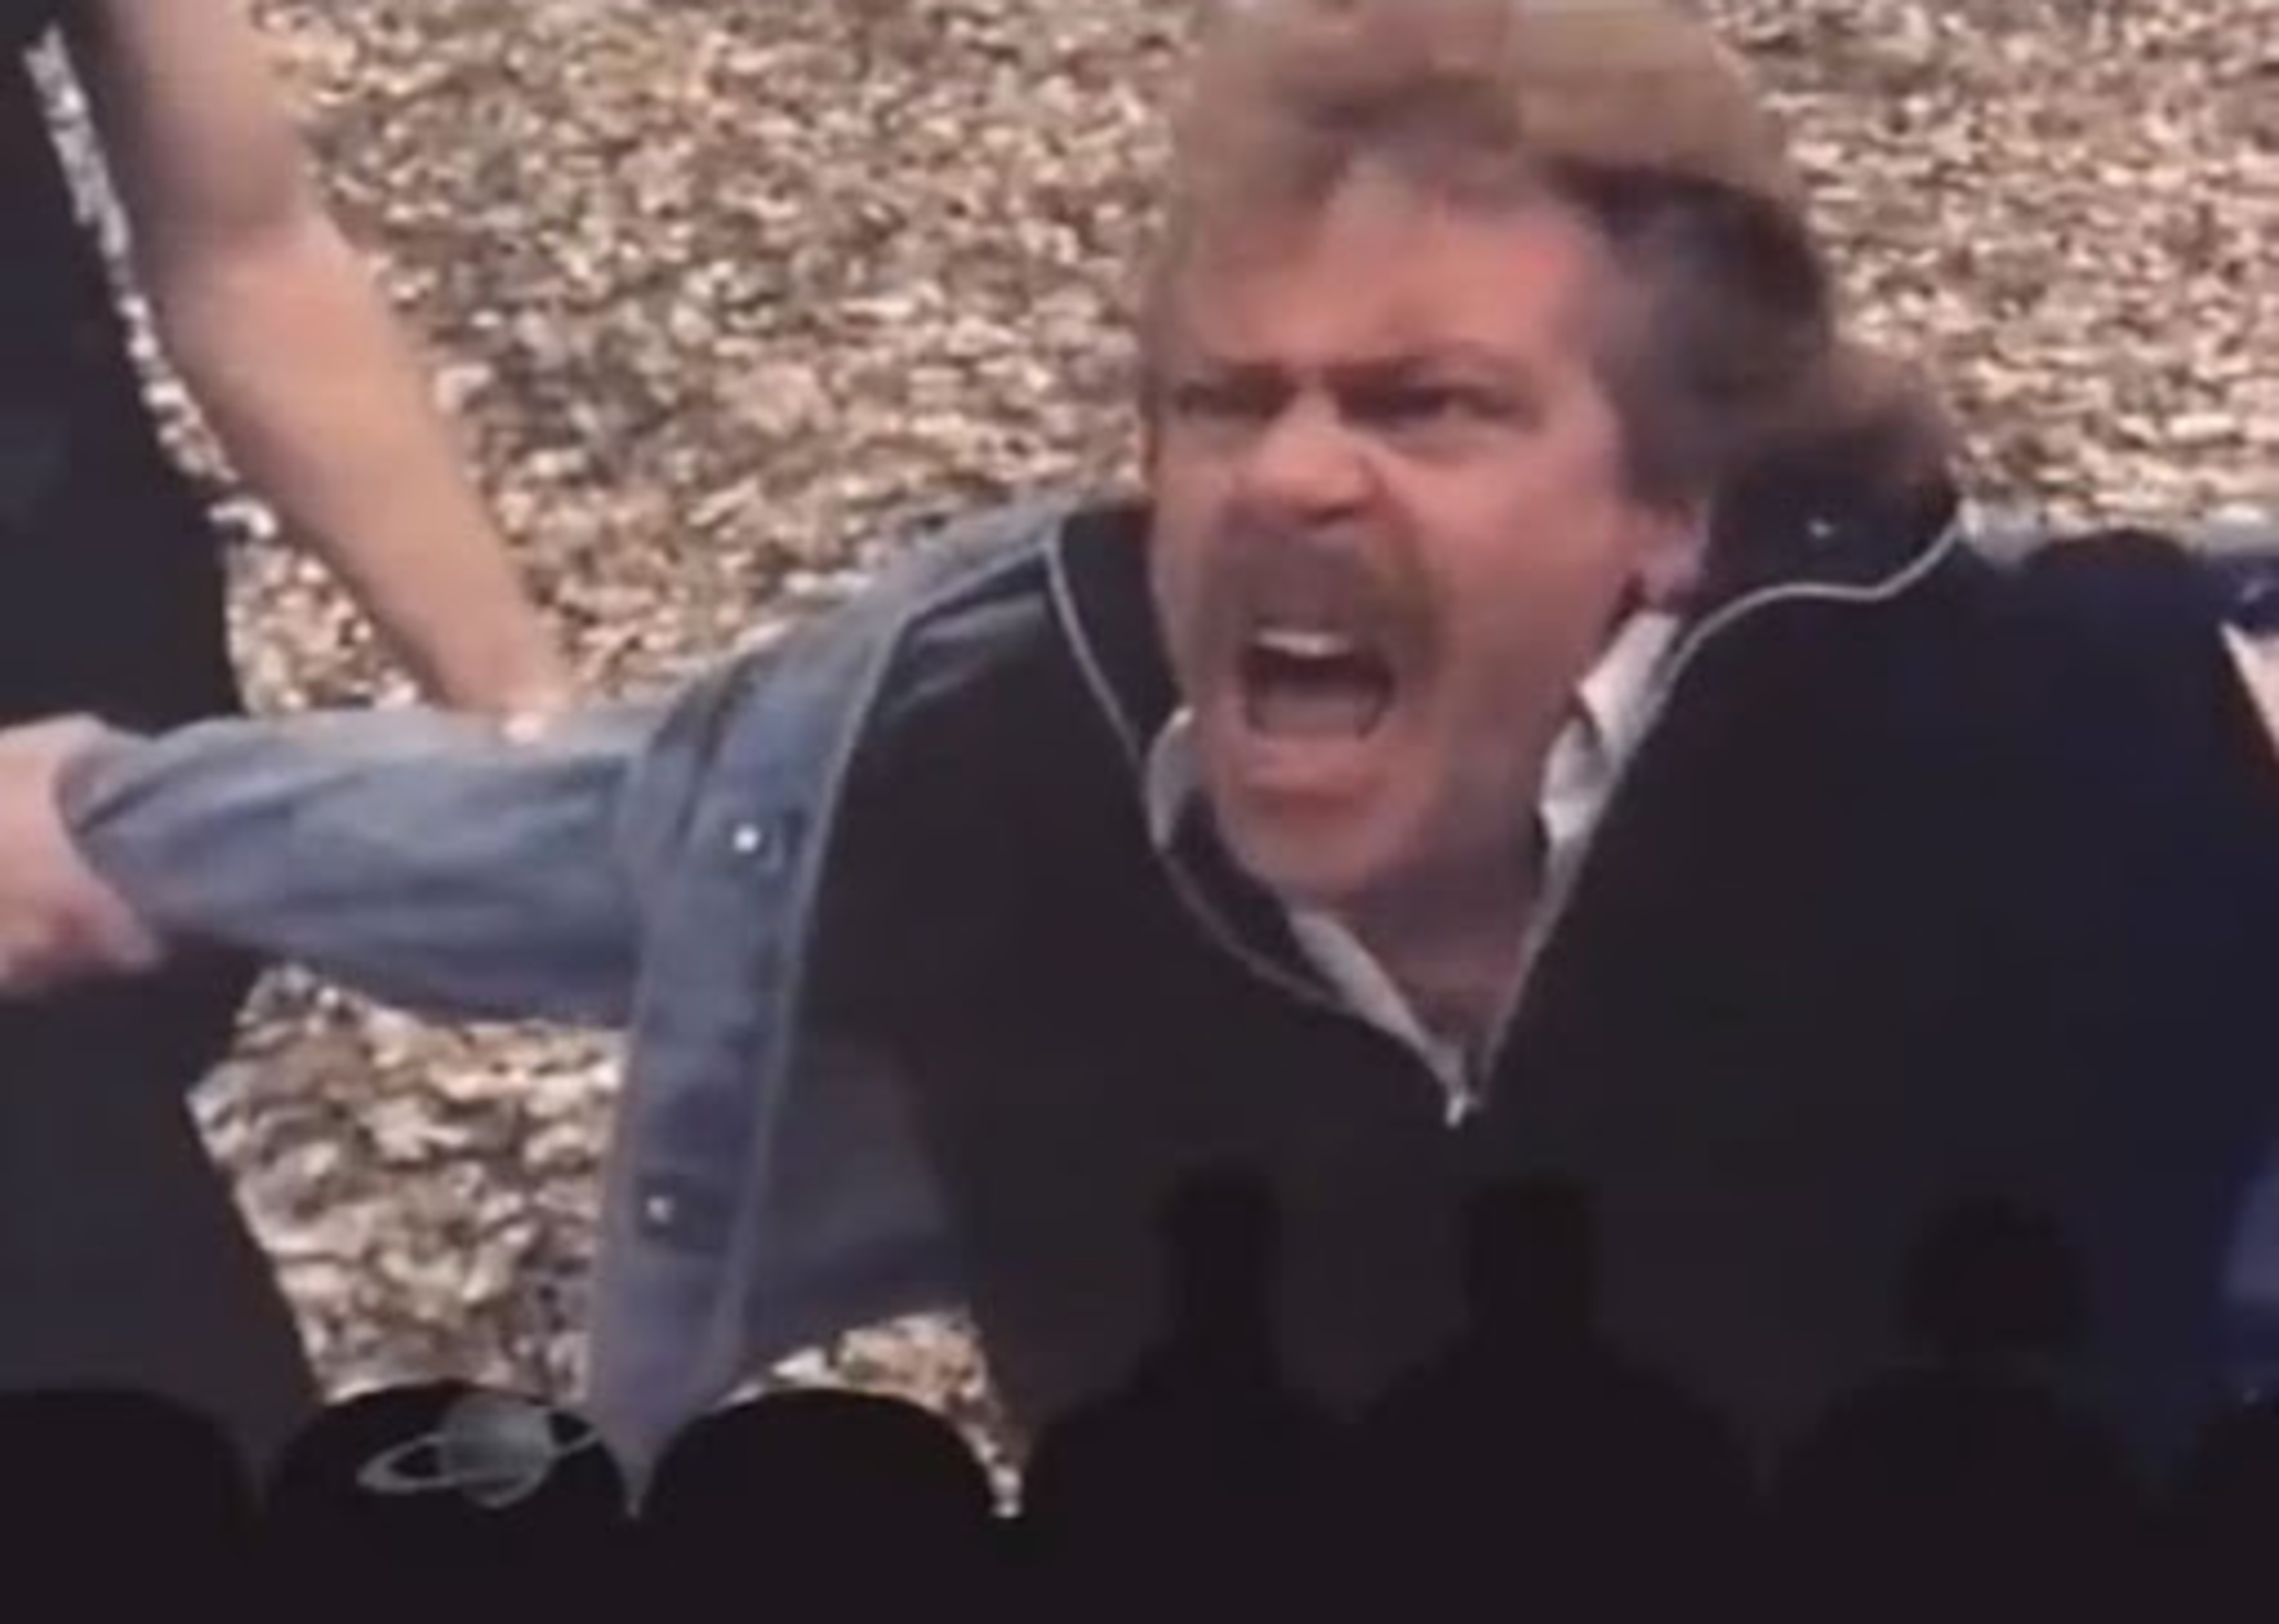 <p>However, if “Laserblast” had been the last episode, we never would have gotten “The Final Sacrifice.” The movie is terrible in a way that lends itself to so many iconic riffs. We’ve got Troy, the main character. We’ve got the photo of his dad, who looks like Larry Csonka. We’ve got the weird prospector type guy. Oh, and the legend himself, Zap Rowsdower.</p><p><a href='https://www.msn.com/en-us/community/channel/vid-cj9pqbr0vn9in2b6ddcd8sfgpfq6x6utp44fssrv6mc2gtybw0us'>Follow us on MSN to see more of our exclusive entertainment content.</a></p>